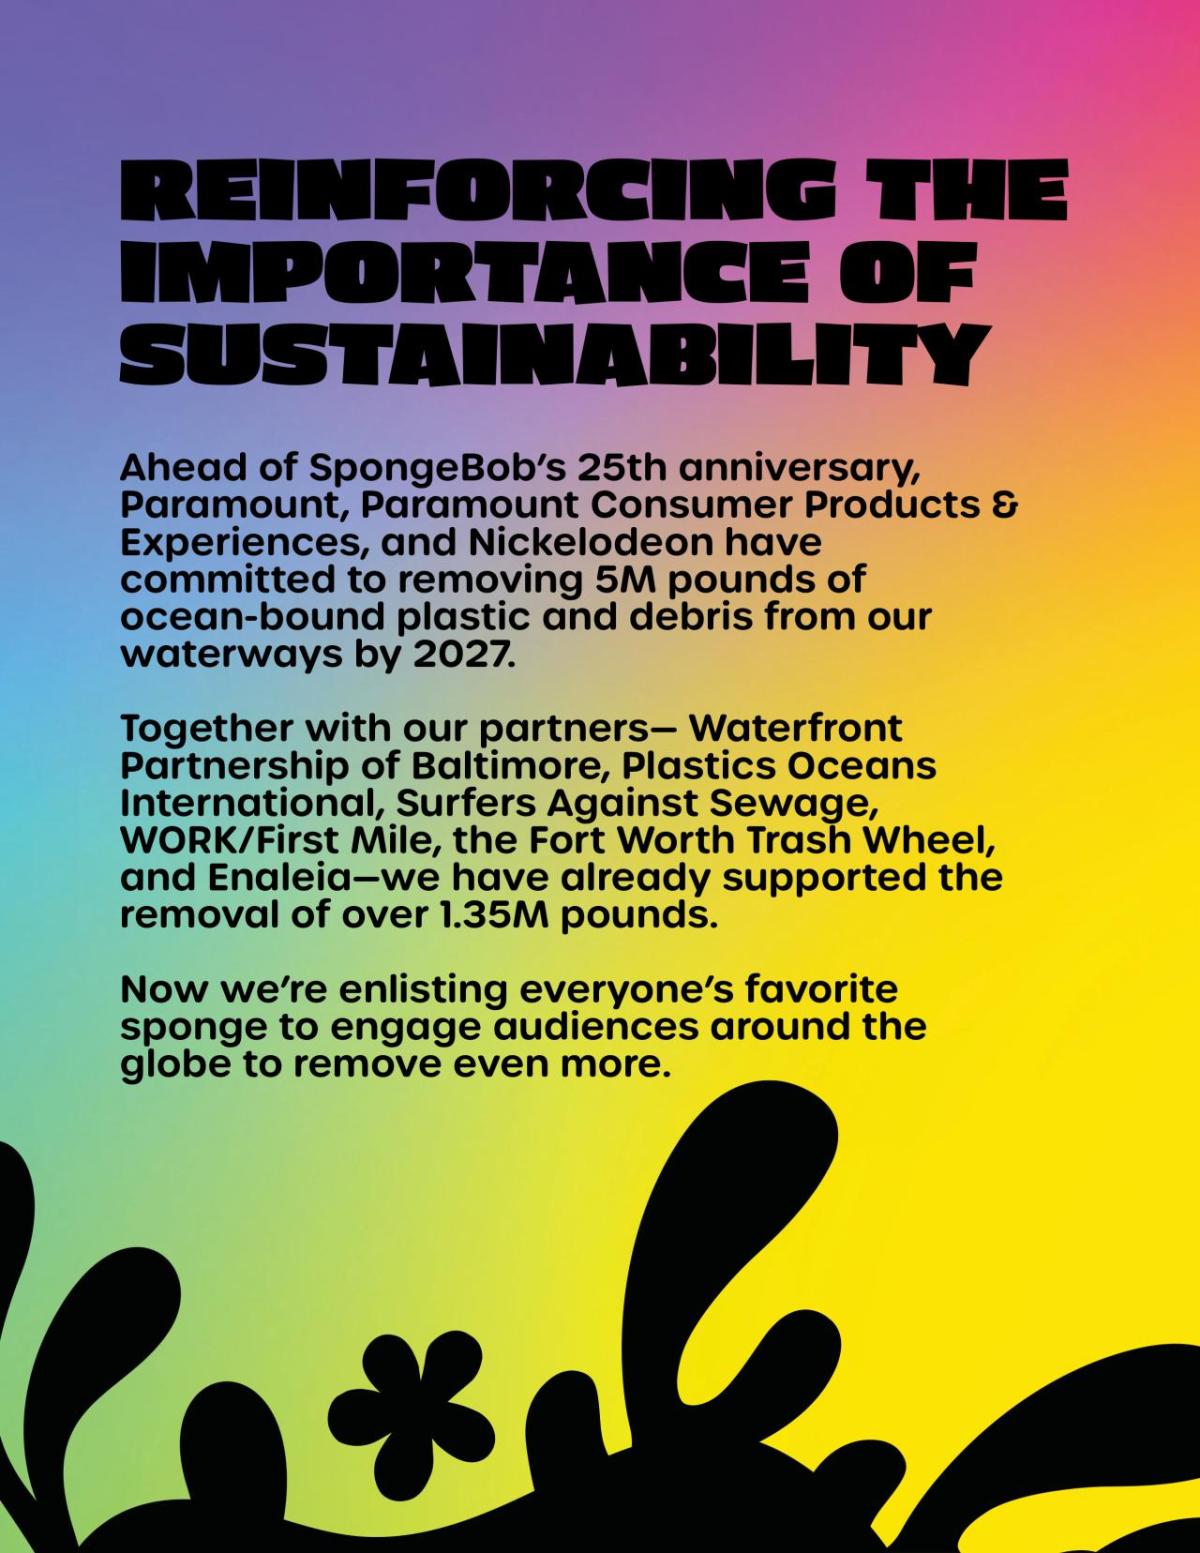 "REINFORCING THE IMPORTANCE OF SUSTAINABILITY"